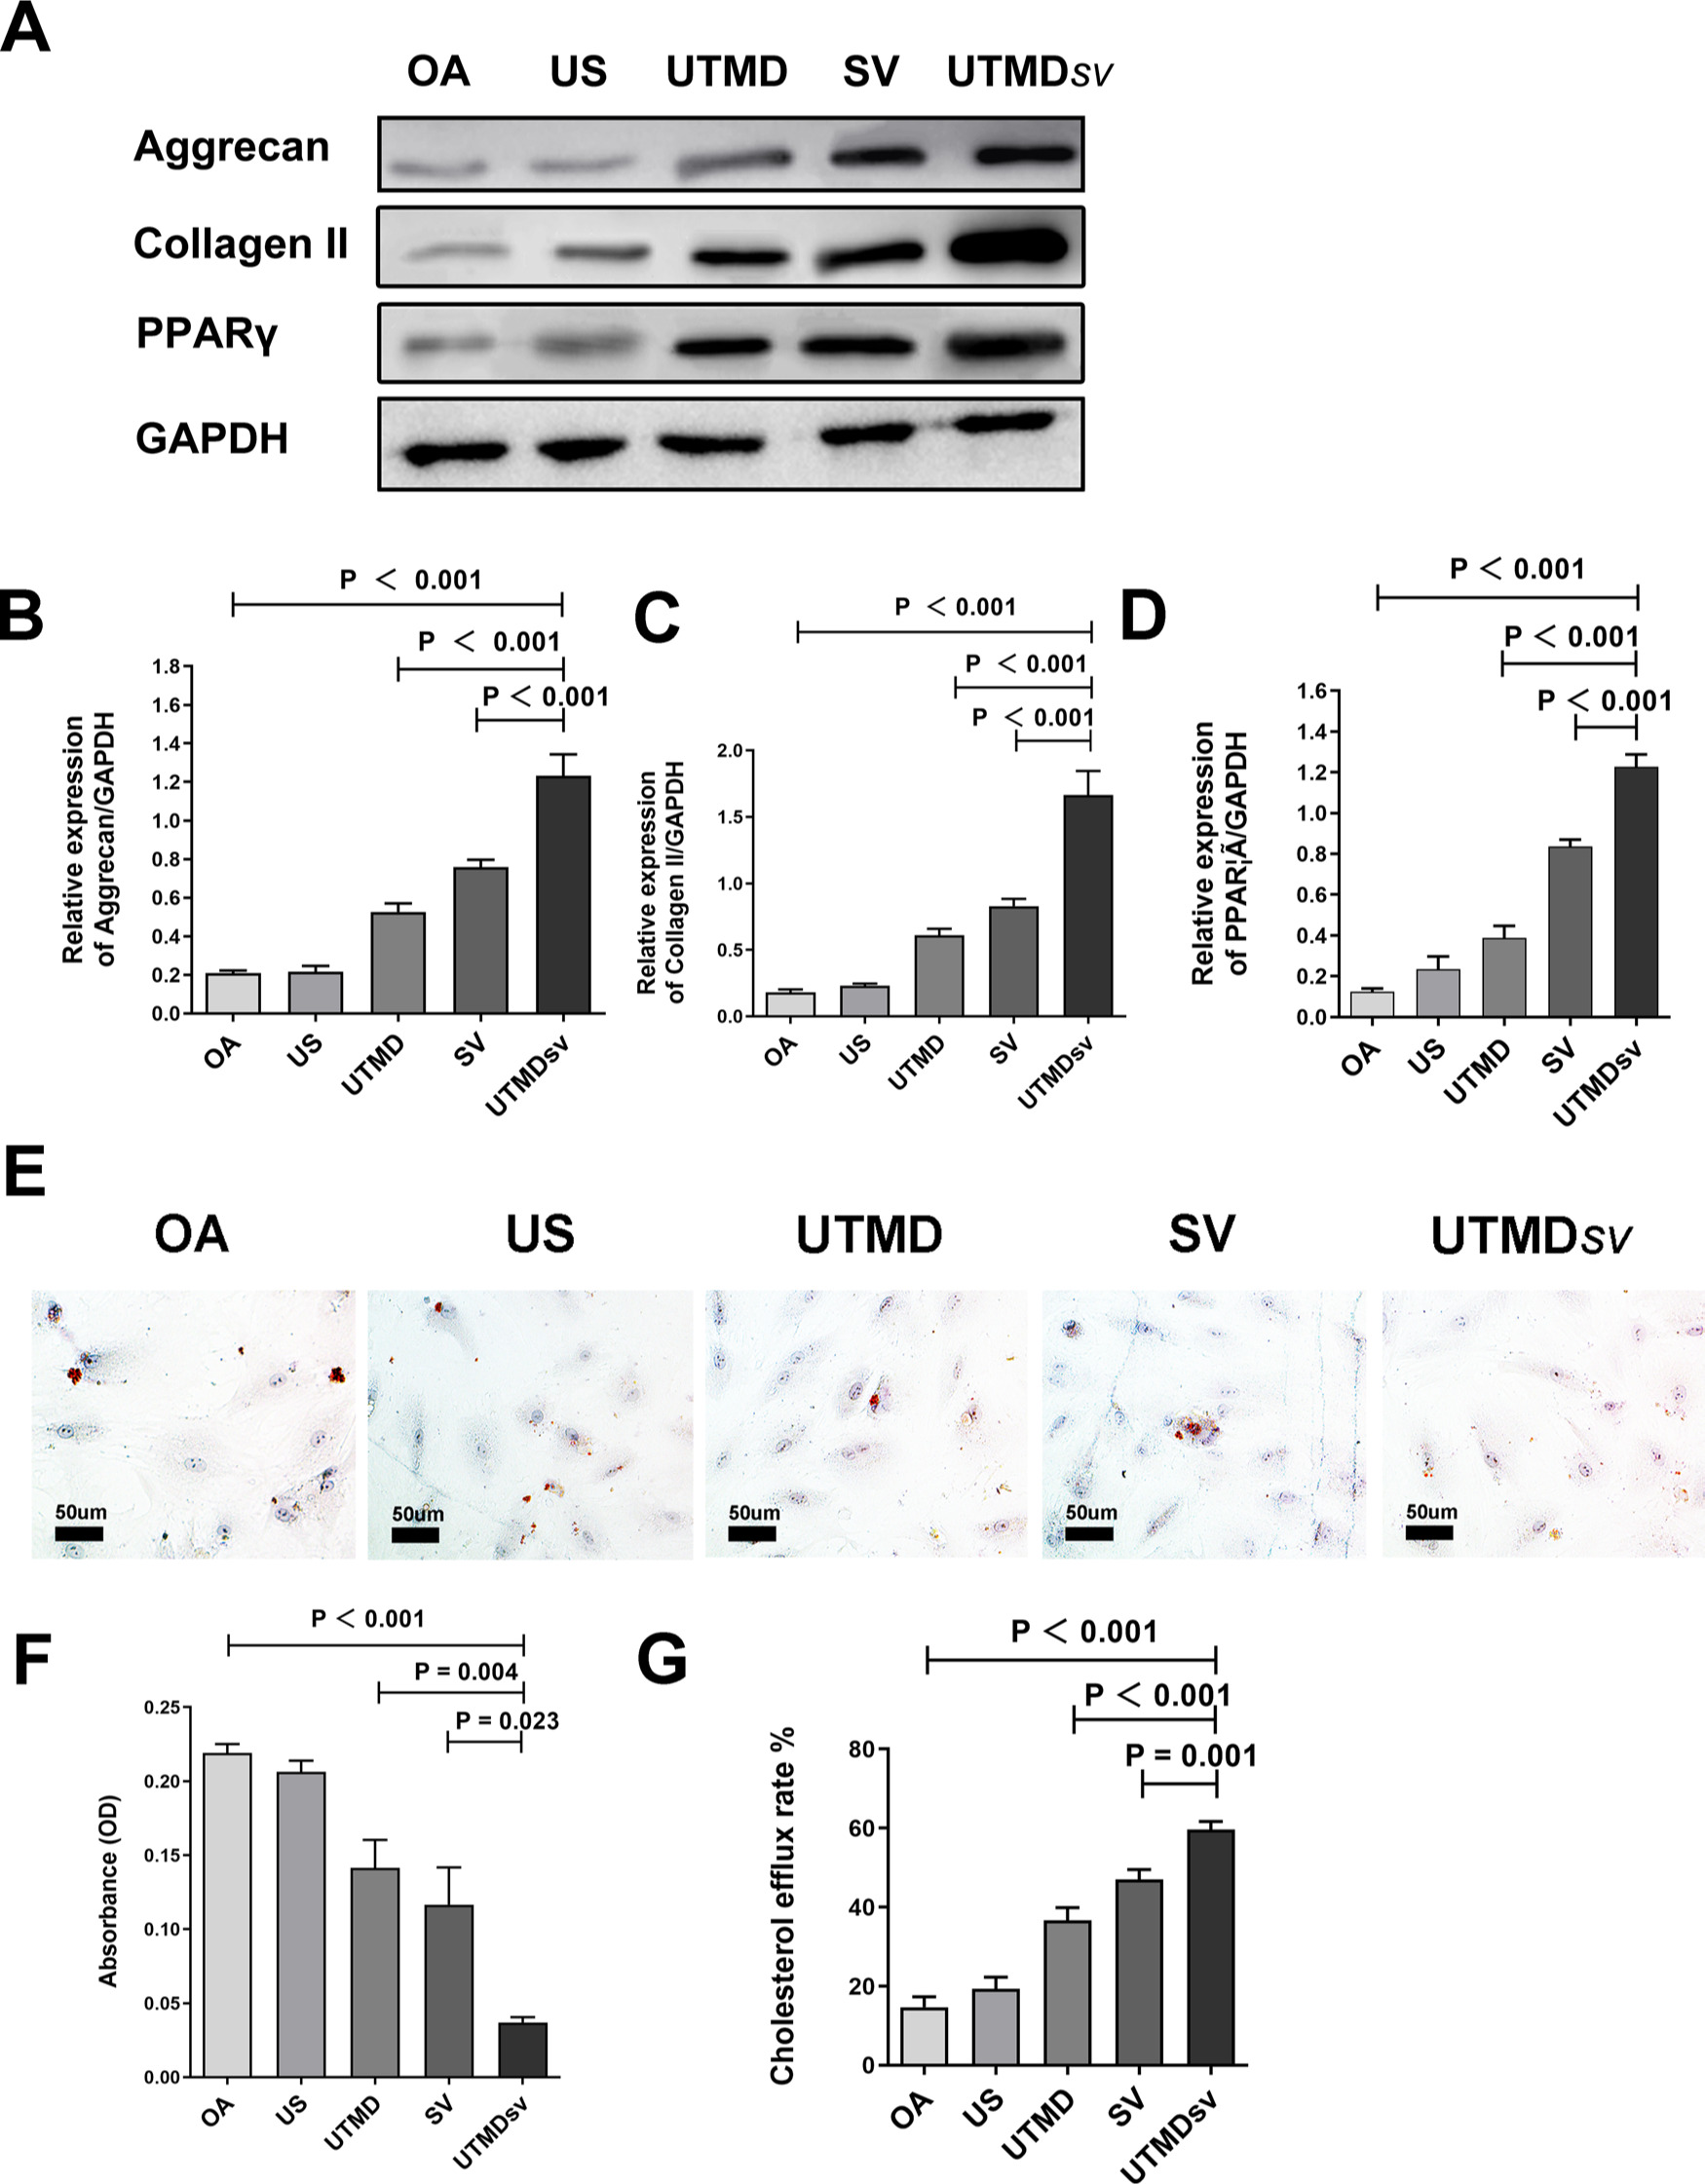 Fig. 2 
            Effects of UTMDsv on cartilage metabolism and lipid metabolism. a) to d) Representative Western blot and quantification of aggrecan, collagen II, and PPARγ, relative to glyceraldehyde-3-phosphate dehydrogenase (GAPDH) in osteoarthritis (OA) chondrocytes after treatment with ultrasound (US), US-targeted microbubble destruction (UTMD), simvastatin (SV), and US-targeted simvastatin-loaded microbubble destruction (UTMDsv). e) Representative oil red images; scale bar = 50 μm. f) Triglyceride levels were quantified in chondrocytes by measuring absorbance at 490 nm. g) The difference in cholesterol efflux rate between groups.
          